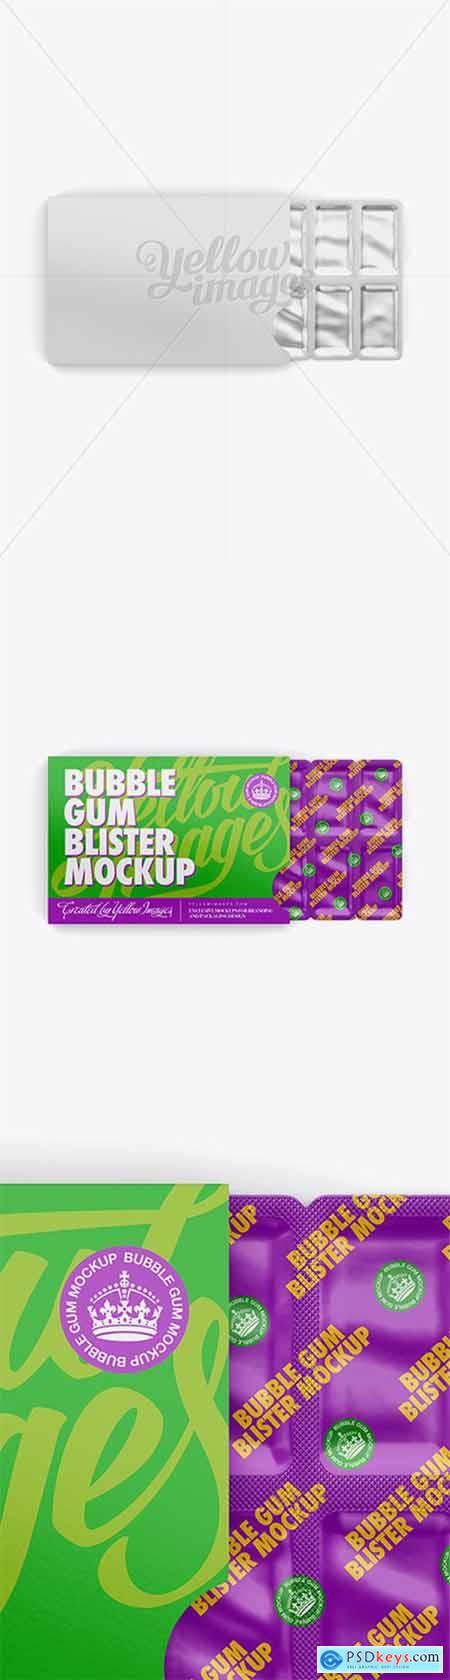 Chewing Gum in Blister Package Mockup - Bottom